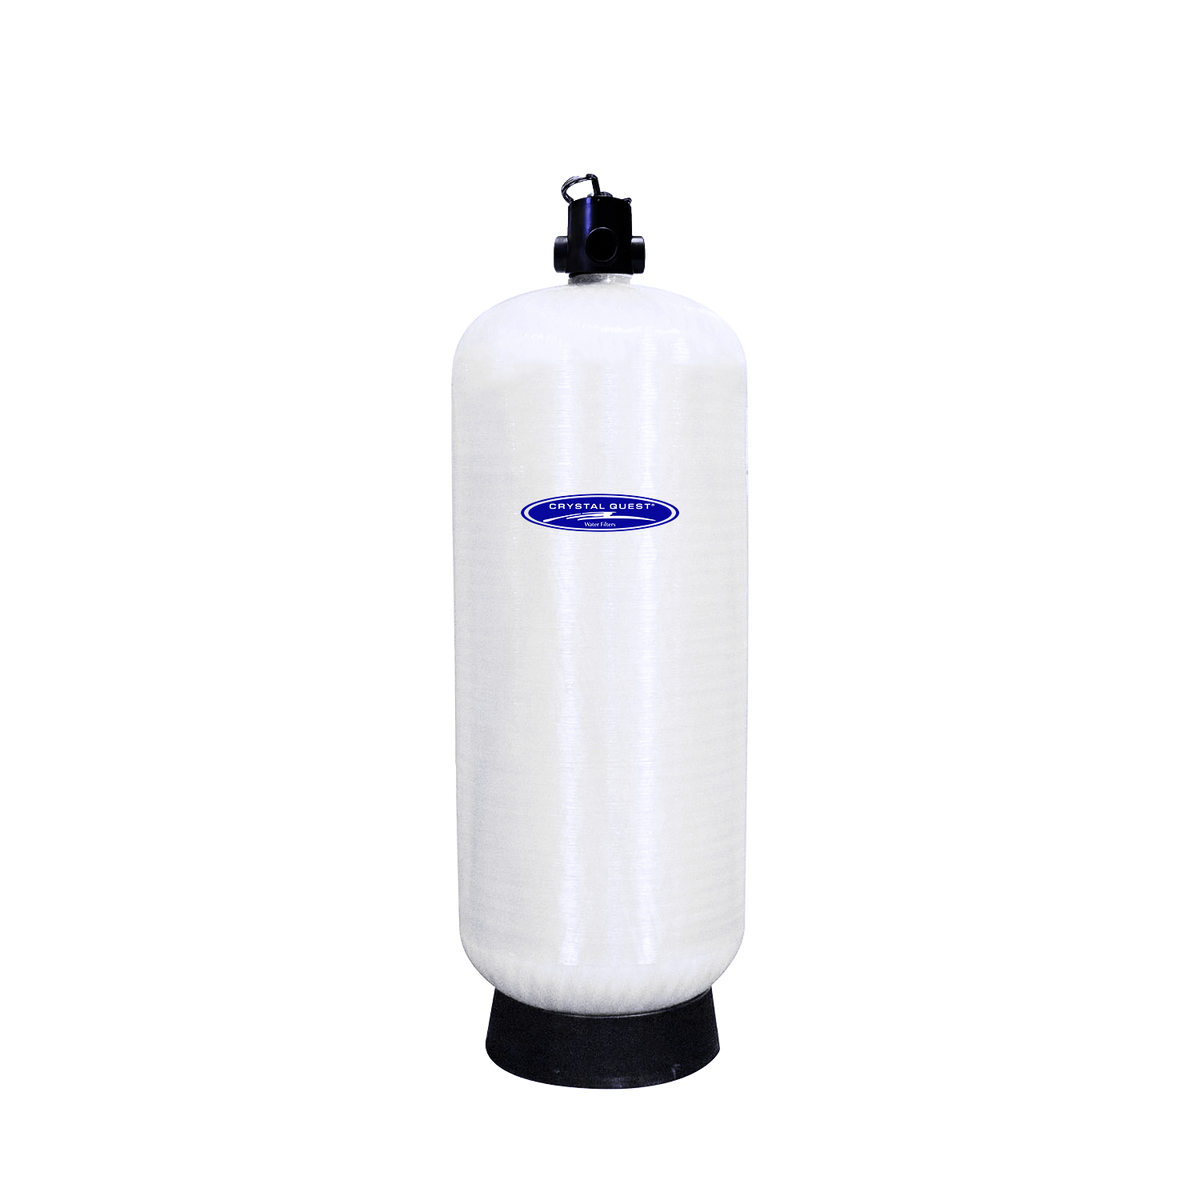 75 GPM / Calcium GAC / Manual (Downflow w/ Backwash) Fluoride Removal Water Filtration System - Commercial - Crystal Quest